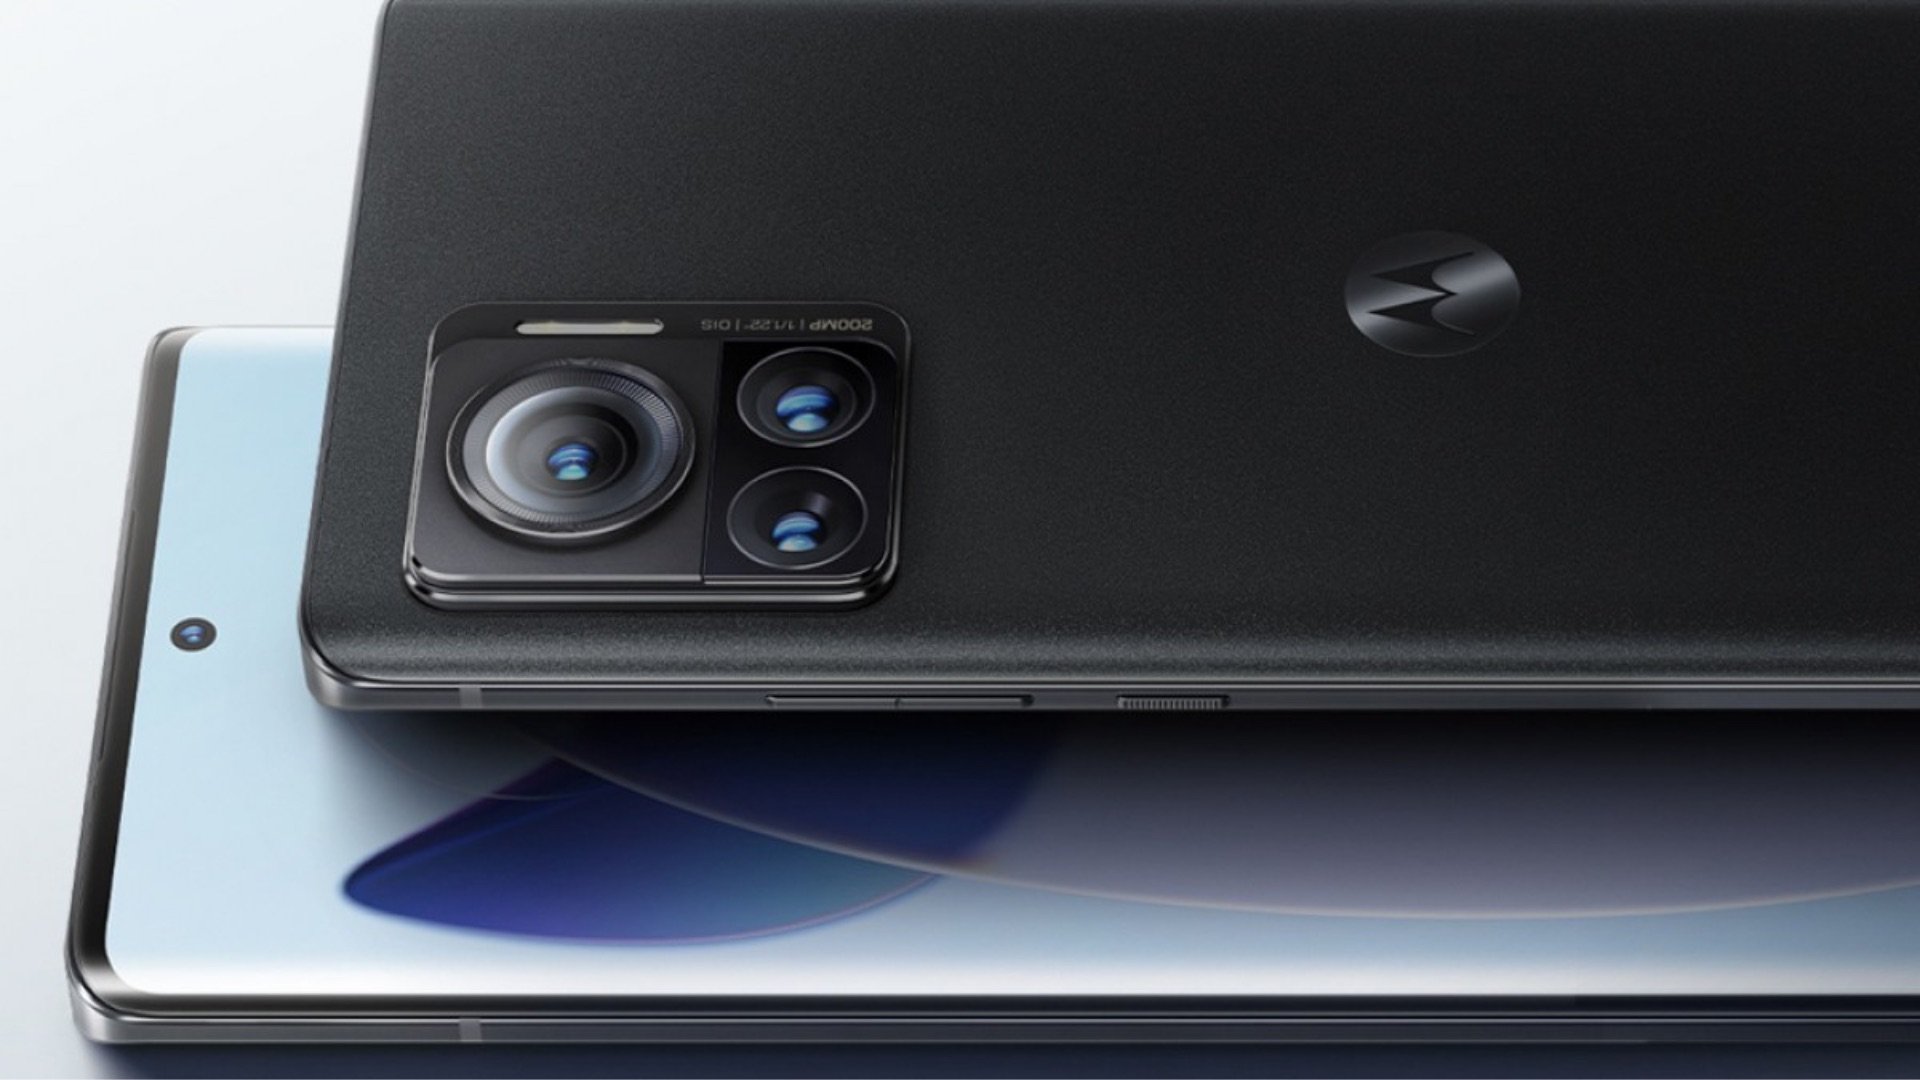 World's first smartphone with Samsung's 200MP camera sensor goes official